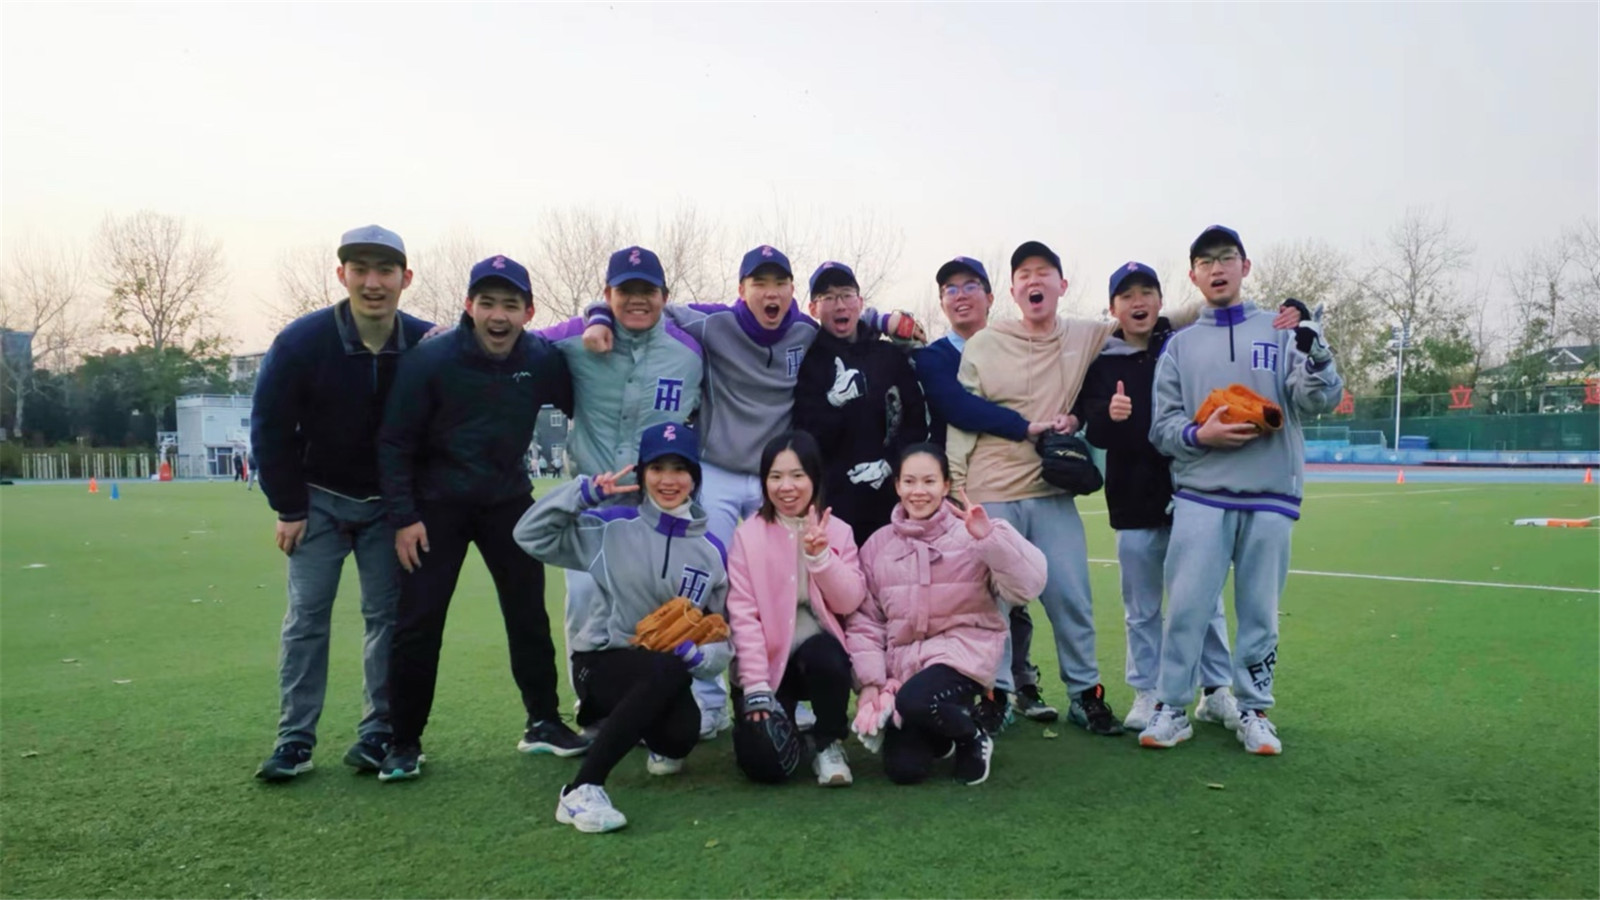 Michael after a baseball game in Tsinghua